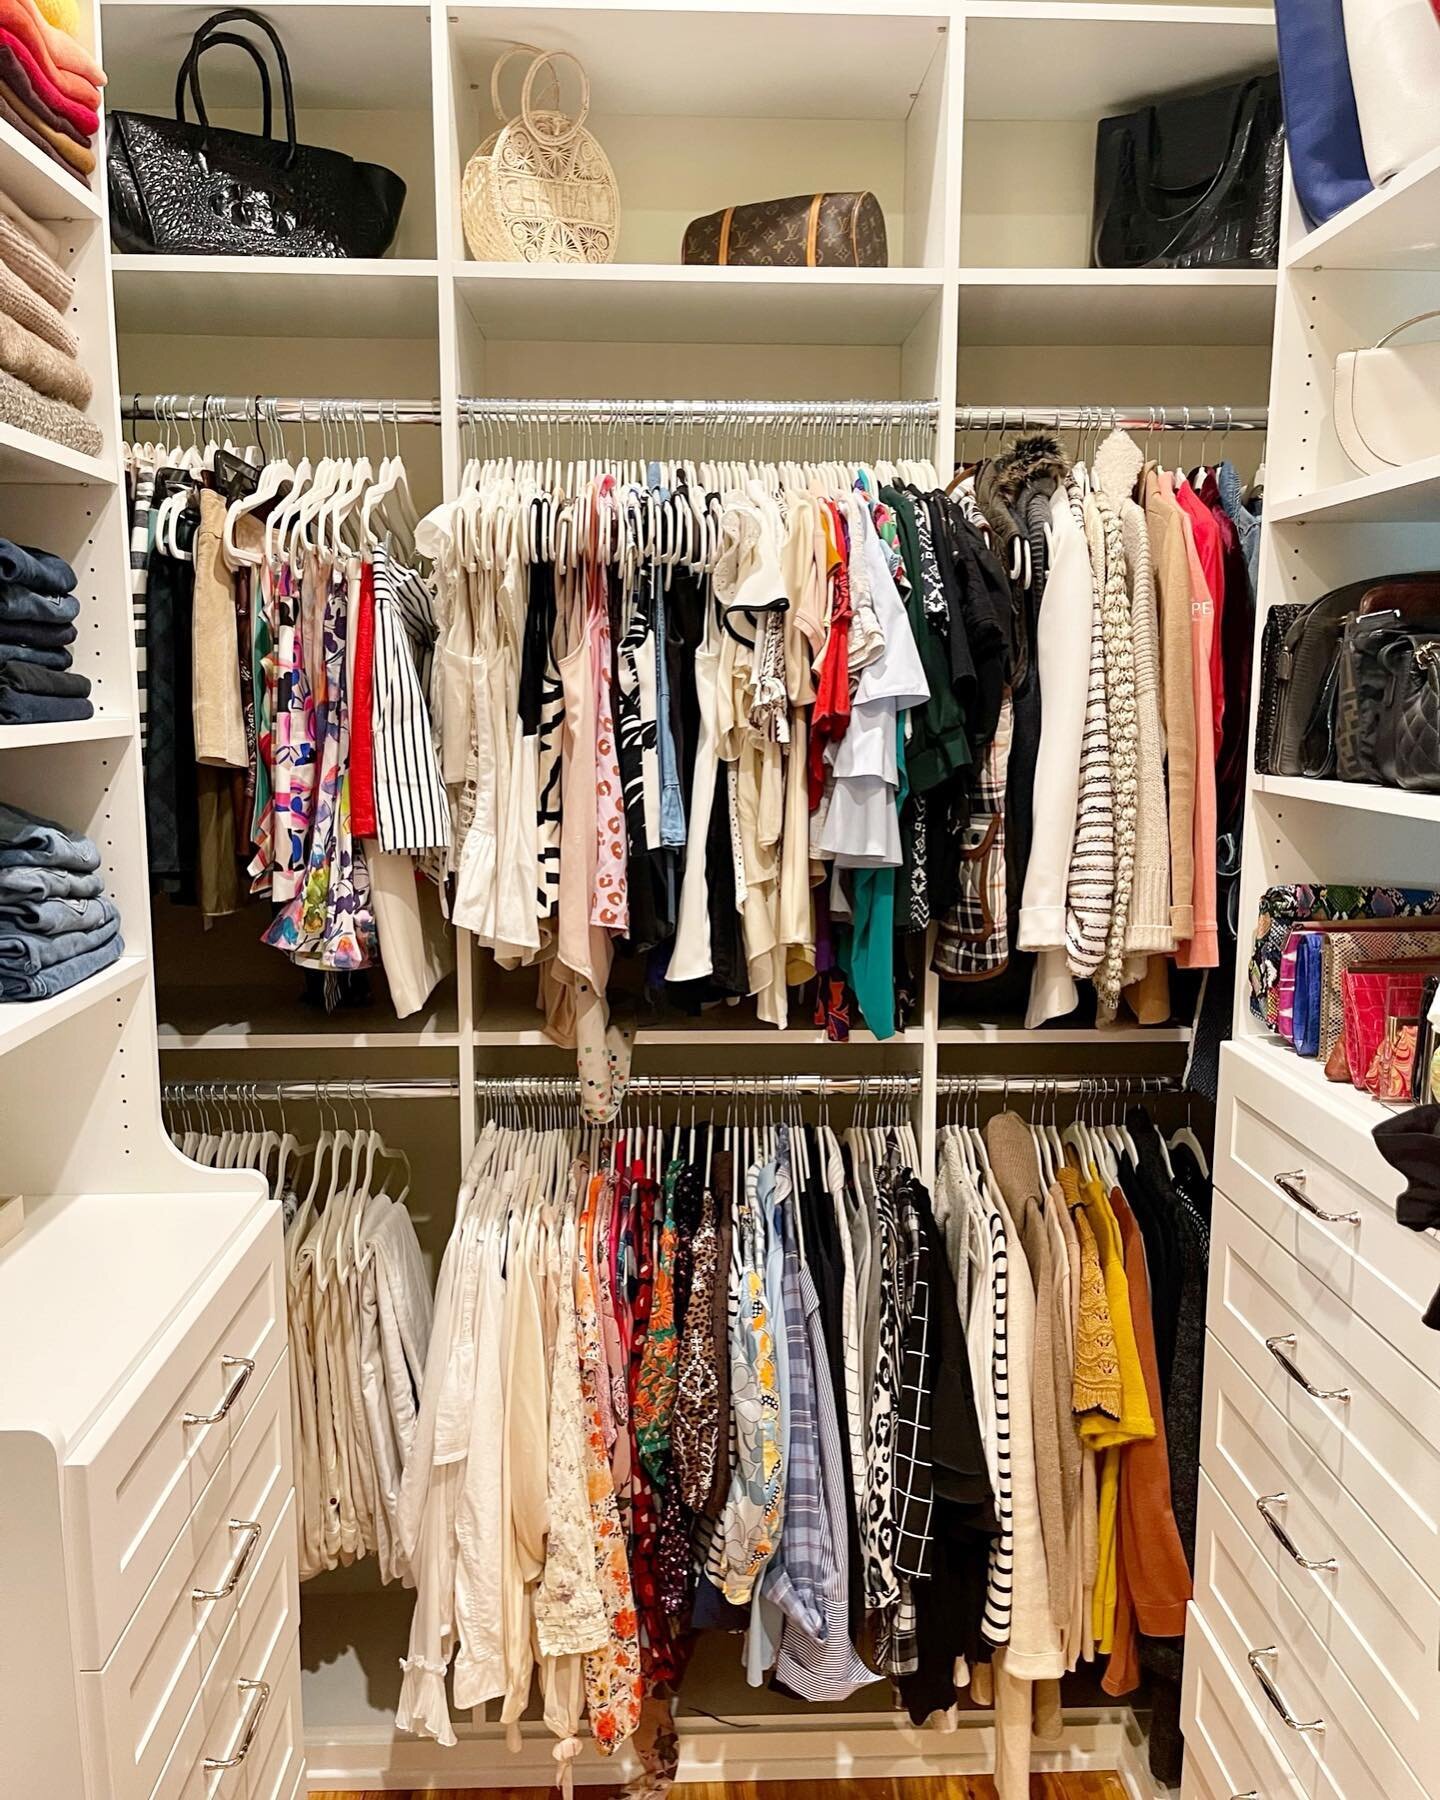 ✨ 𝑰𝒕&rsquo;𝒔 𝒂𝒍𝒍 𝒊𝒏 𝒕𝒉𝒆 𝒅𝒆𝒕𝒂𝒊𝒍𝒔✨

Talk about move in ready 👌🏼
We organized, packed, and transported this beautiful closet from a rental home to their newly renovated home, and had everything set up before move in day 🏡🤍